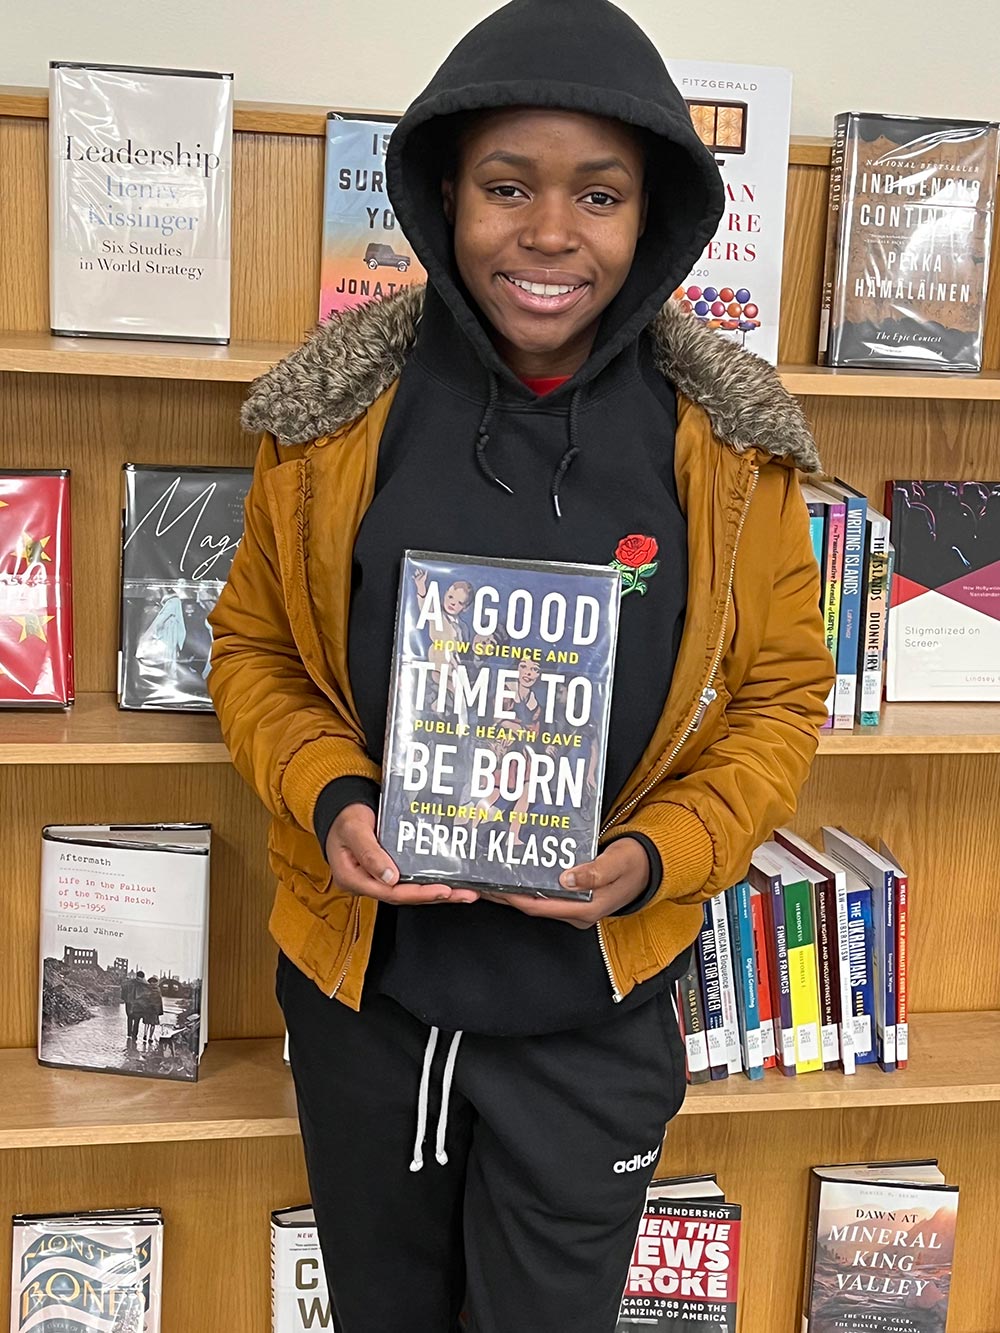 Jennifer Asamoah holding the book A Good Time to be Born